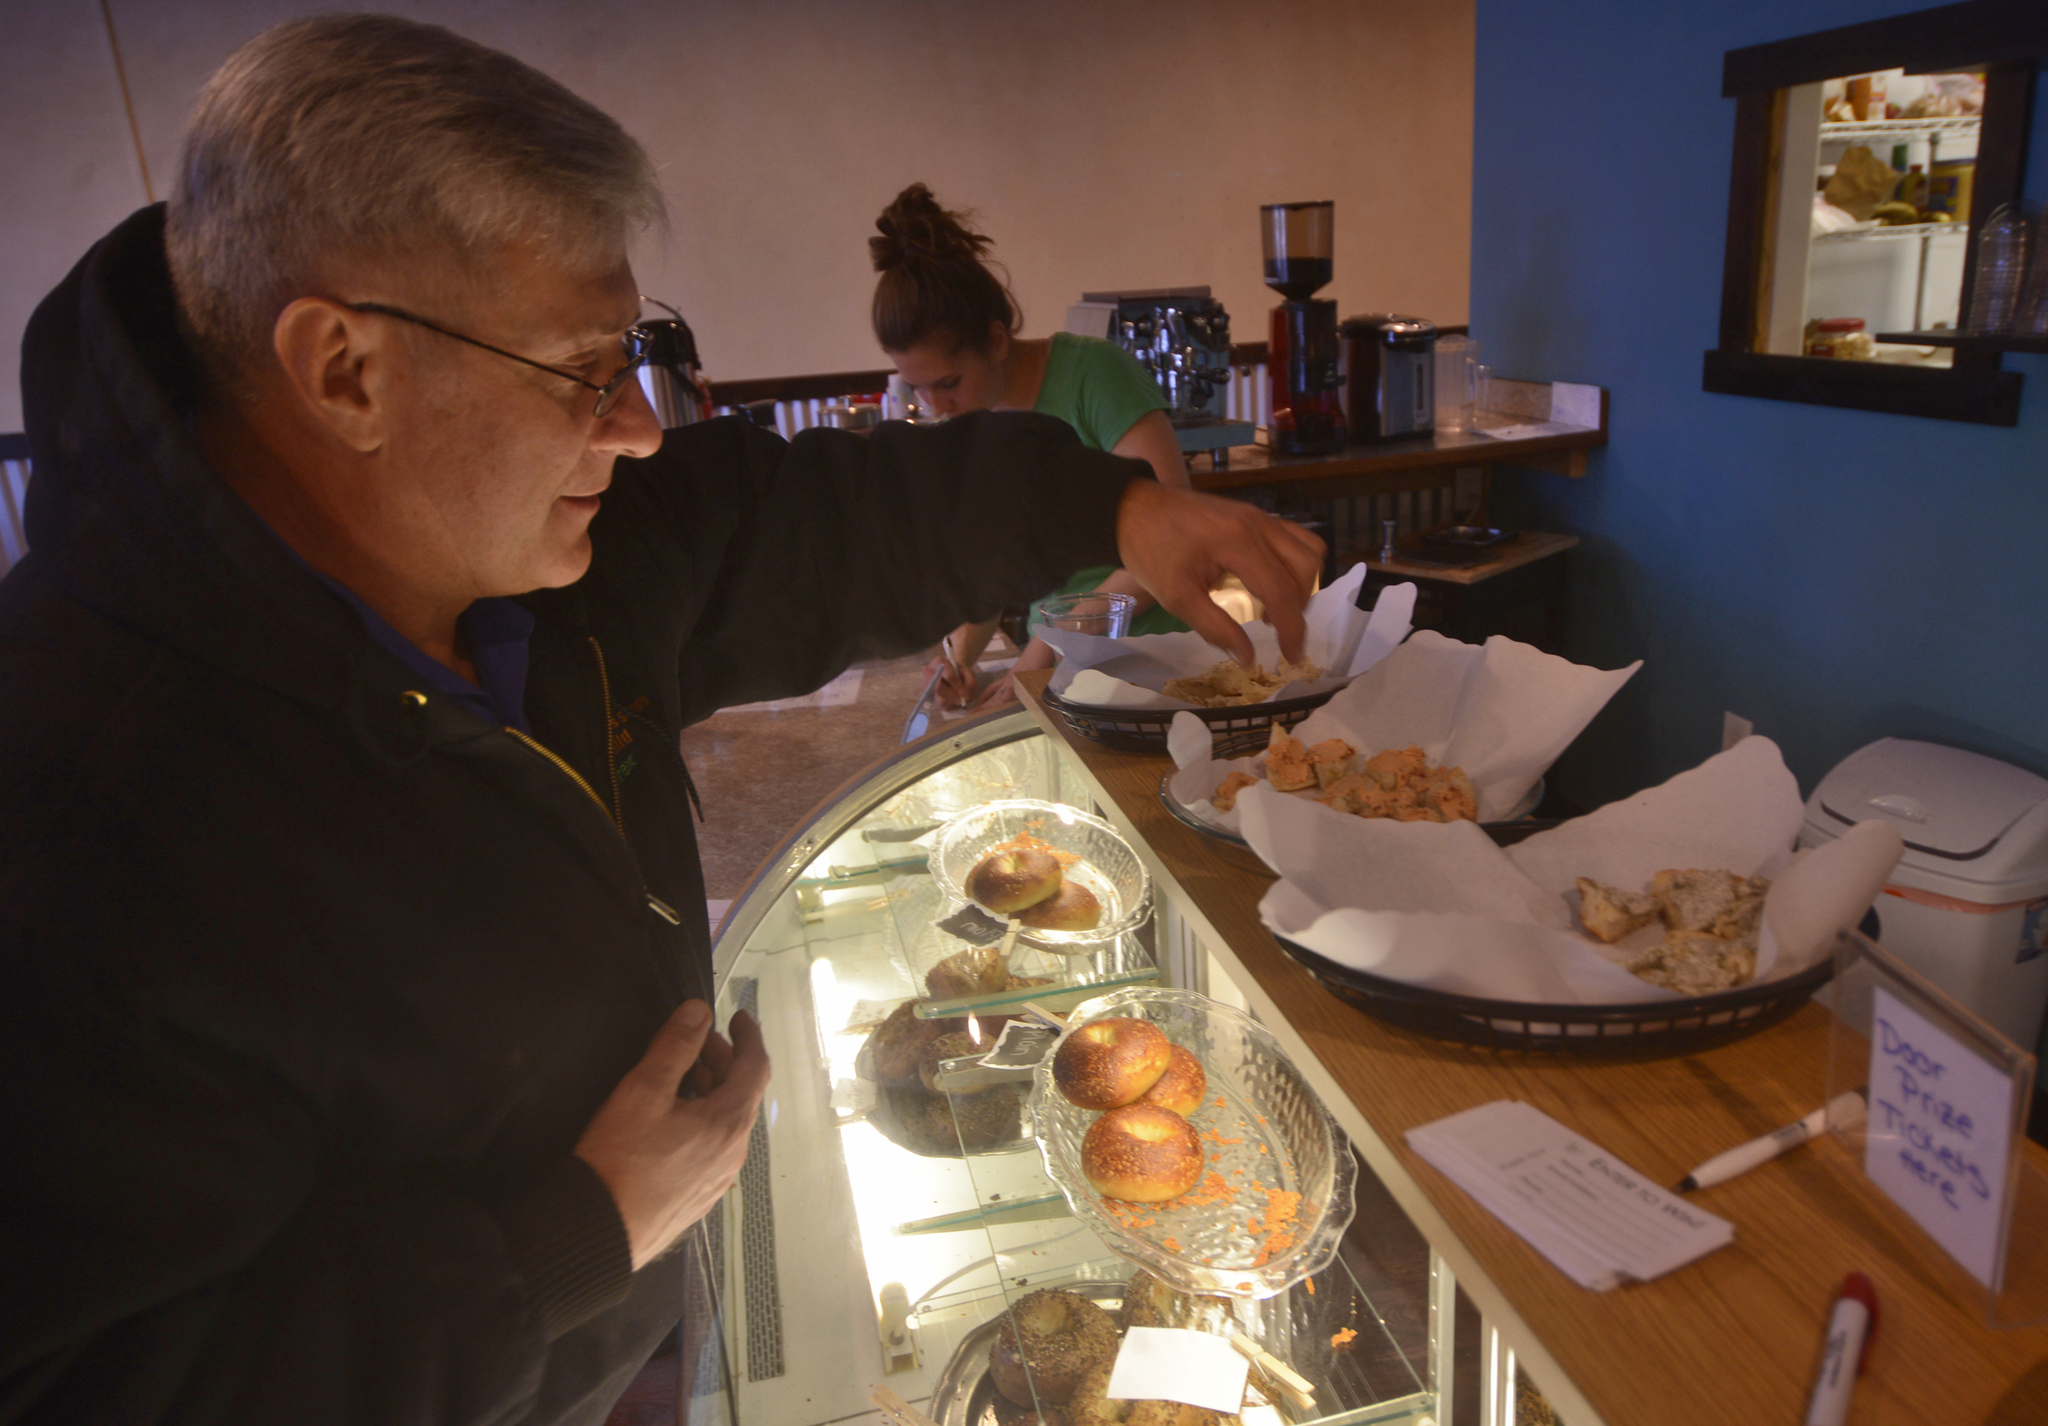 Jeff Warton samples three flavors of bagel spread at the grand opening of the Kenai location of Everything Bagels on Tuesday, Jan. 31,2017 in Kenai, Alaska. The grand opening comes 13 days after the Kenai shop had its soft opening on Jan. 18, seven months after Everything Bagels opened its first location in Soldotna on July 15, 2016, and on the one-year anniversary of co-owners Matt and Pamela Parker (with Brooke and John Campbell) making their first batch of bagels in their home kitchen, Pamela Parker said. "We came from Florida, where all the New Yorkers go to retire, so there's tons of delicious bagels there," she said. "We wanted to bring that up here." (Ben Boettger/Peninsula Clarion)